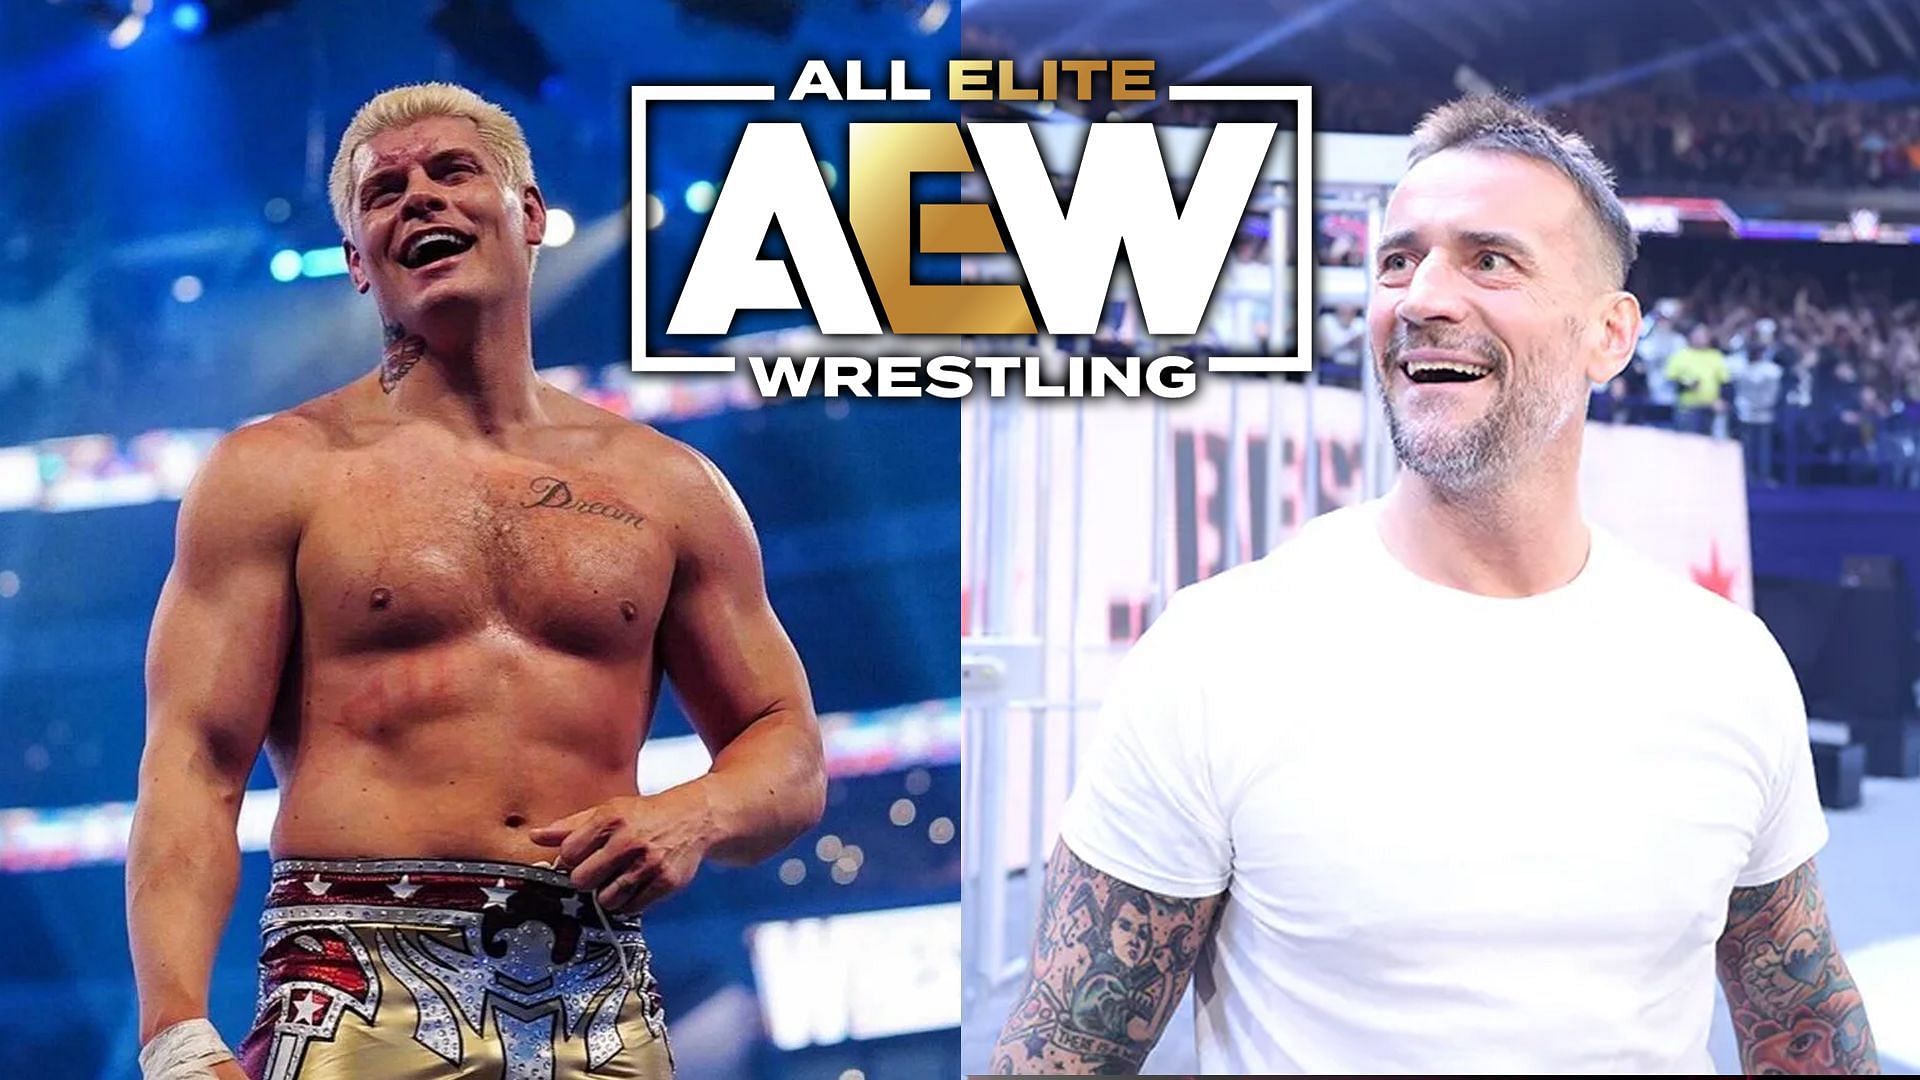 Former AEW stars Cody Rhodes and CM Punk are both signed with WWE now